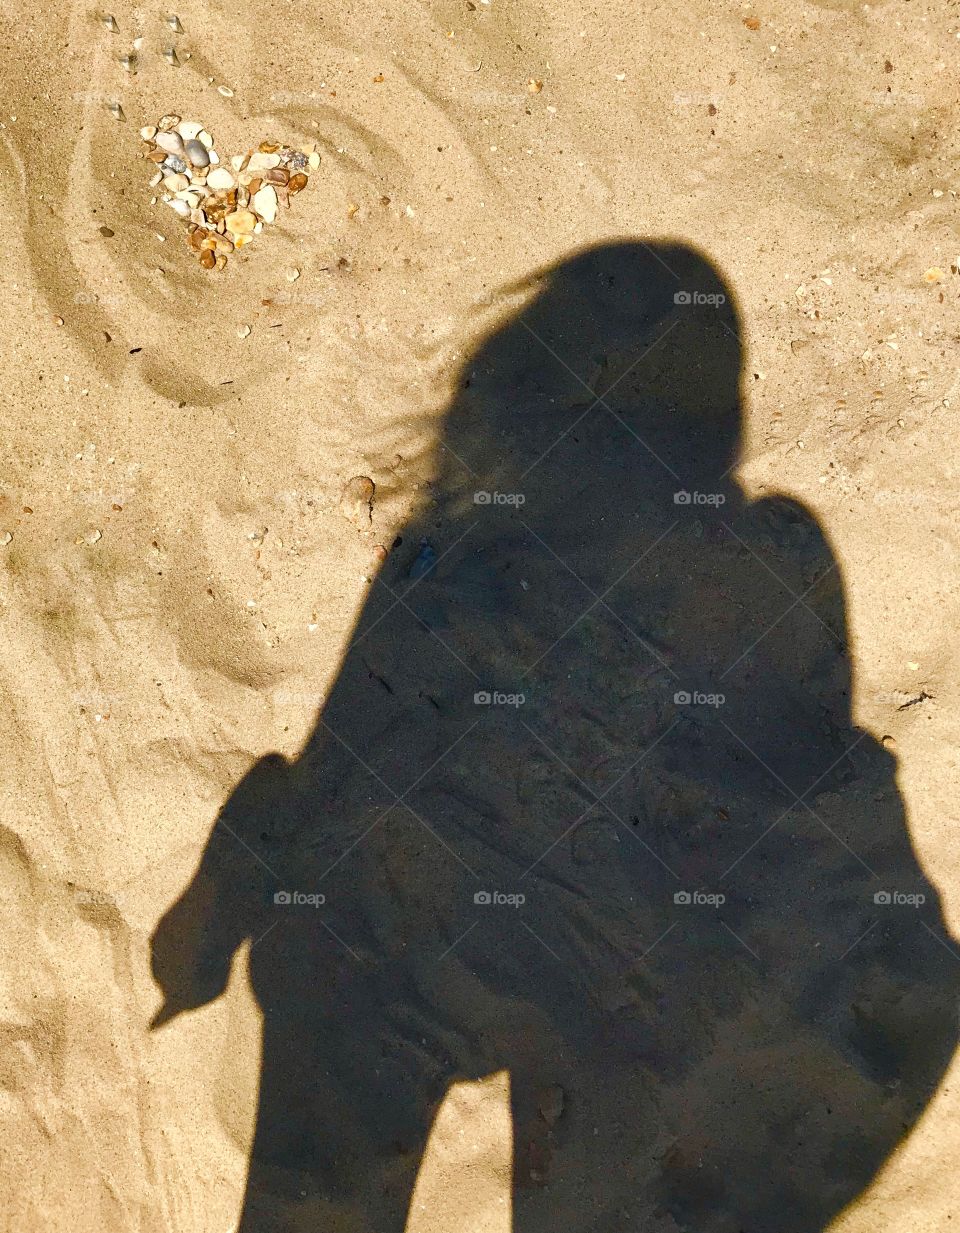 Heart in the sand and shadow of a girl. Sand sun shells pebbles. Pebble heart. Wind in hair. Contrast 